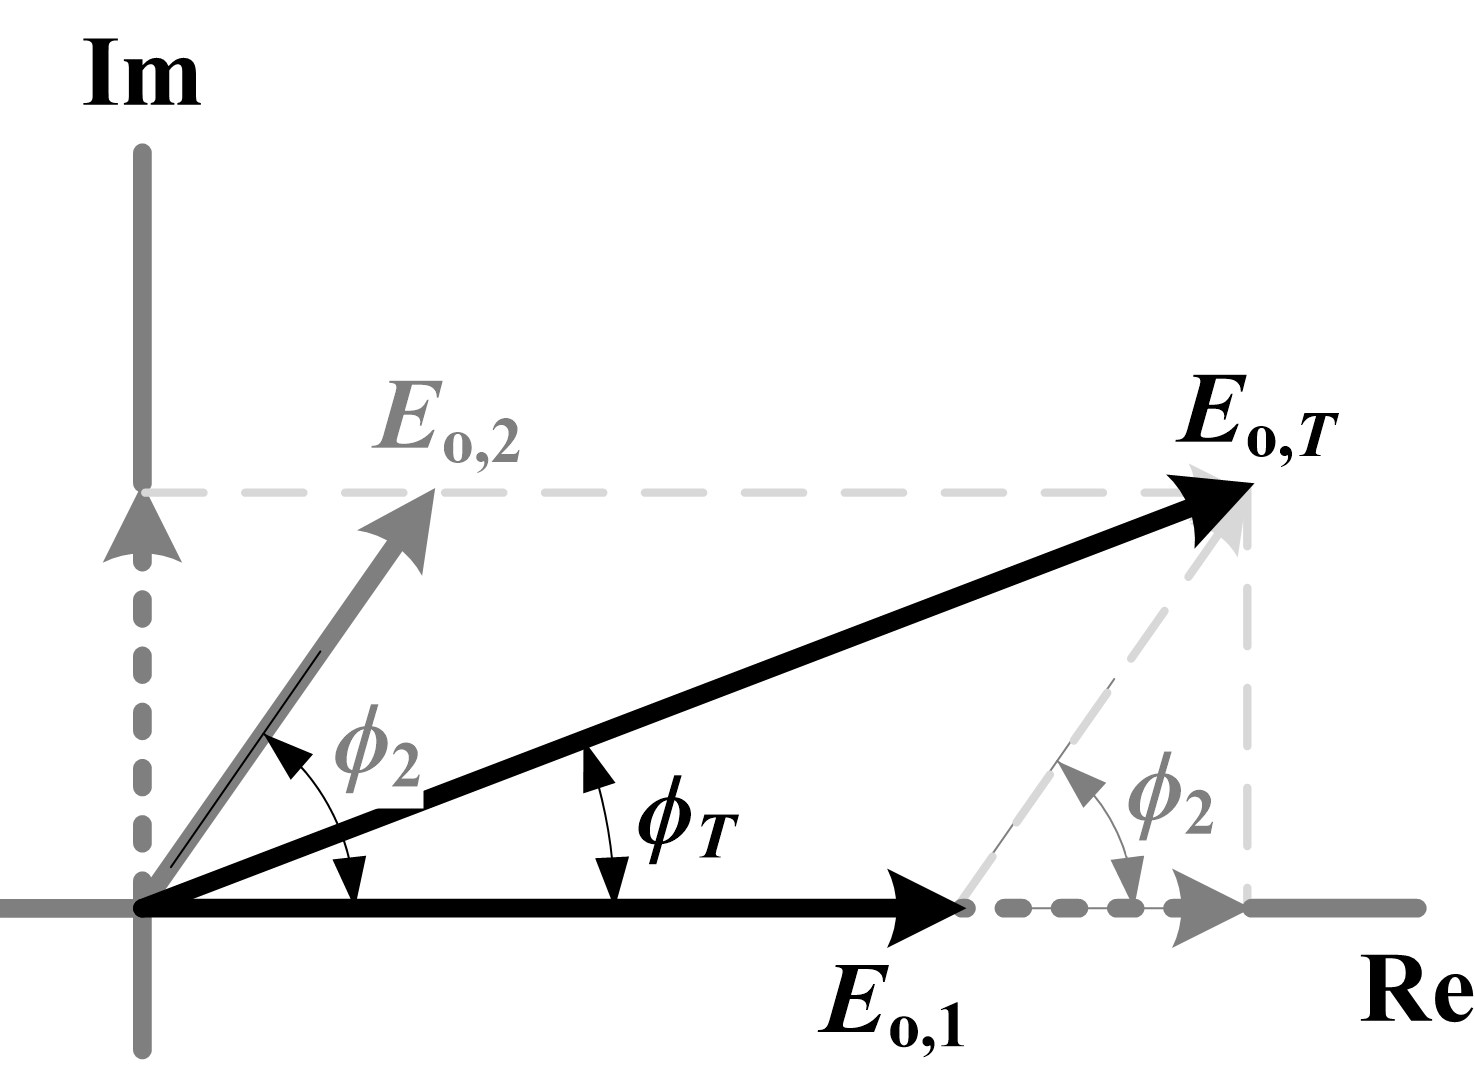 Phasor diagram to determine Eo,2 and ϕ2 from the defined Eo,T, ϕT, Eo,1, and ϕ1 (= 0).